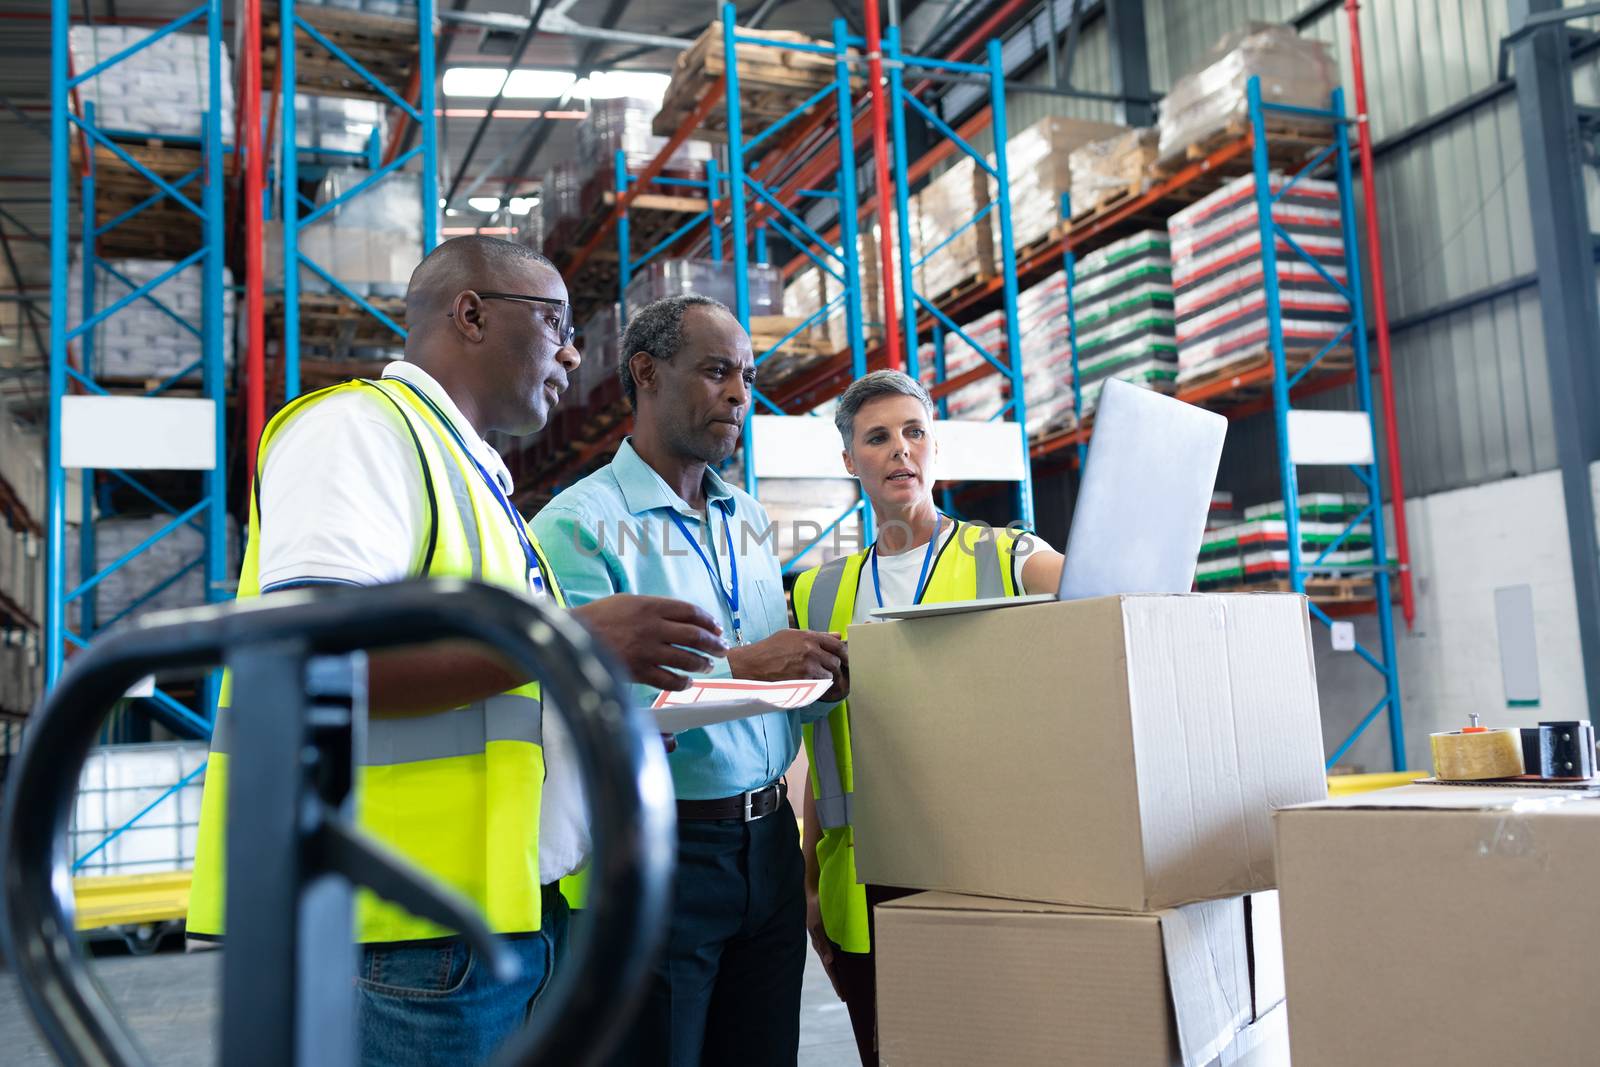 Side view of mature diverse warehouse staffs discussing over laptop in warehouse. This is a freight transportation and distribution warehouse. Industrial and industrial workers concept